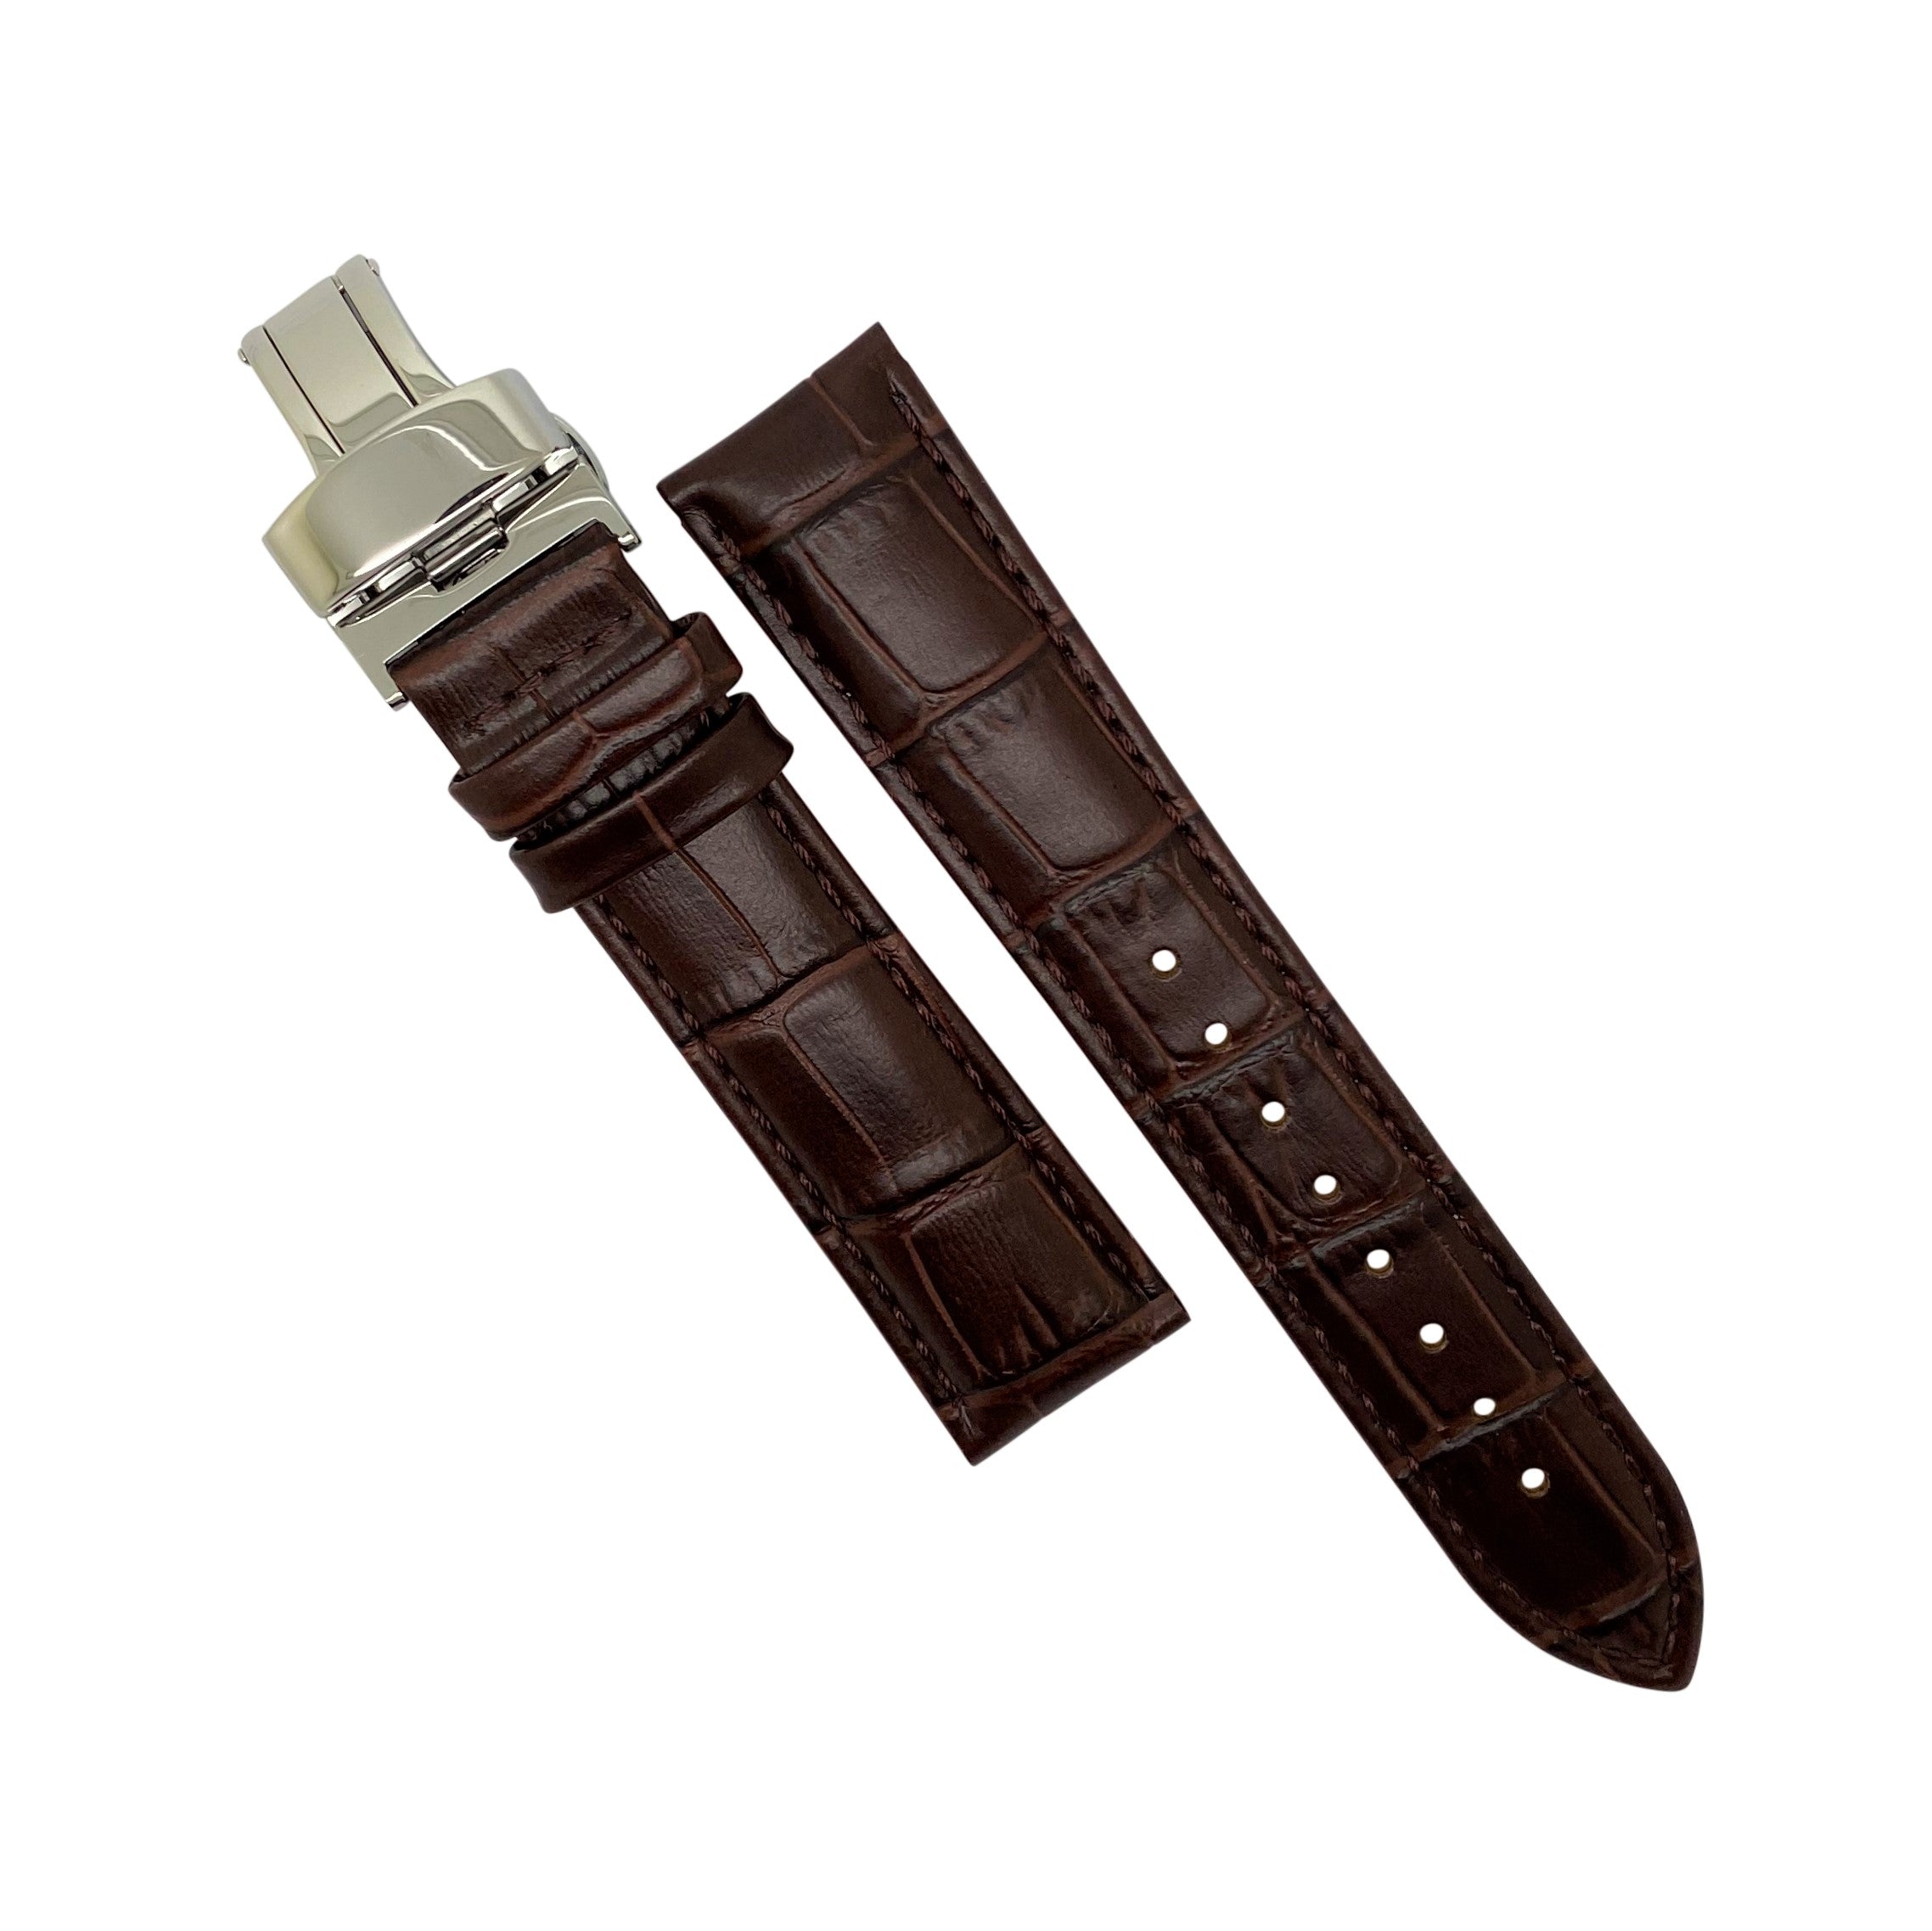 Genuine Croc Pattern Leather Watch Strap in Brown w/ Butterfly Clasp